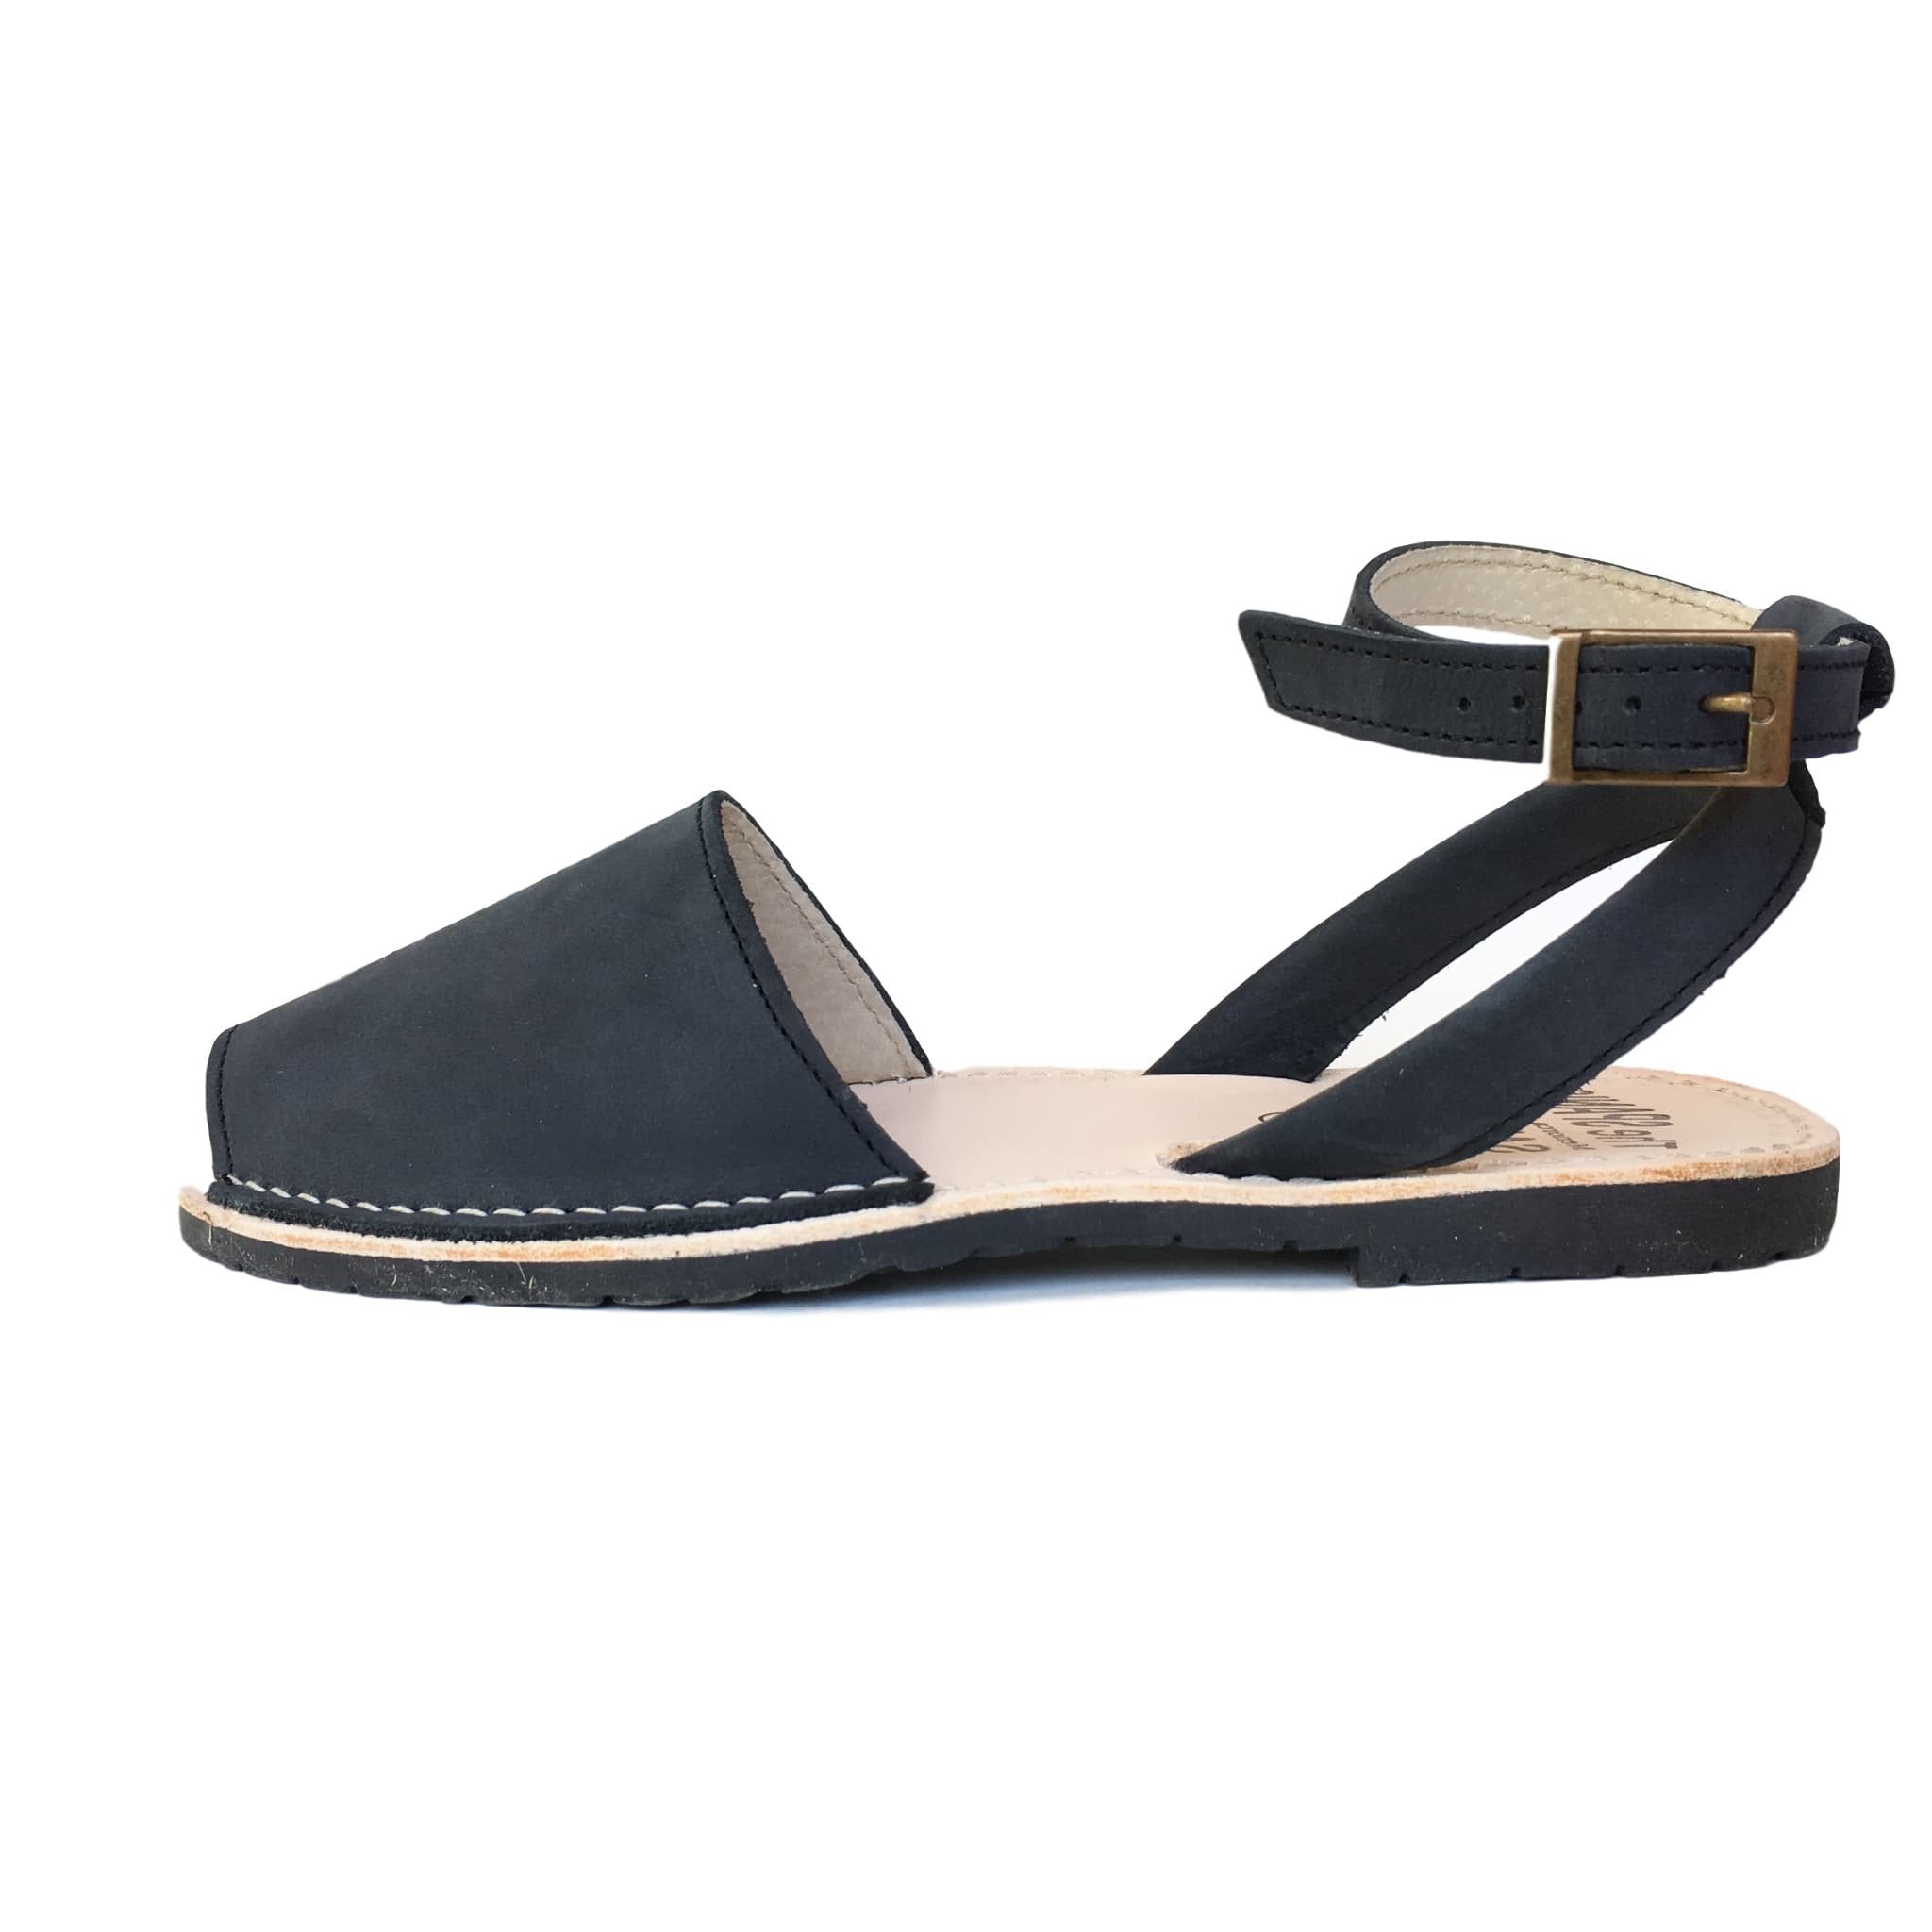 Suede sandals with an ankle strap - MarcoShoes.eu Online Shop